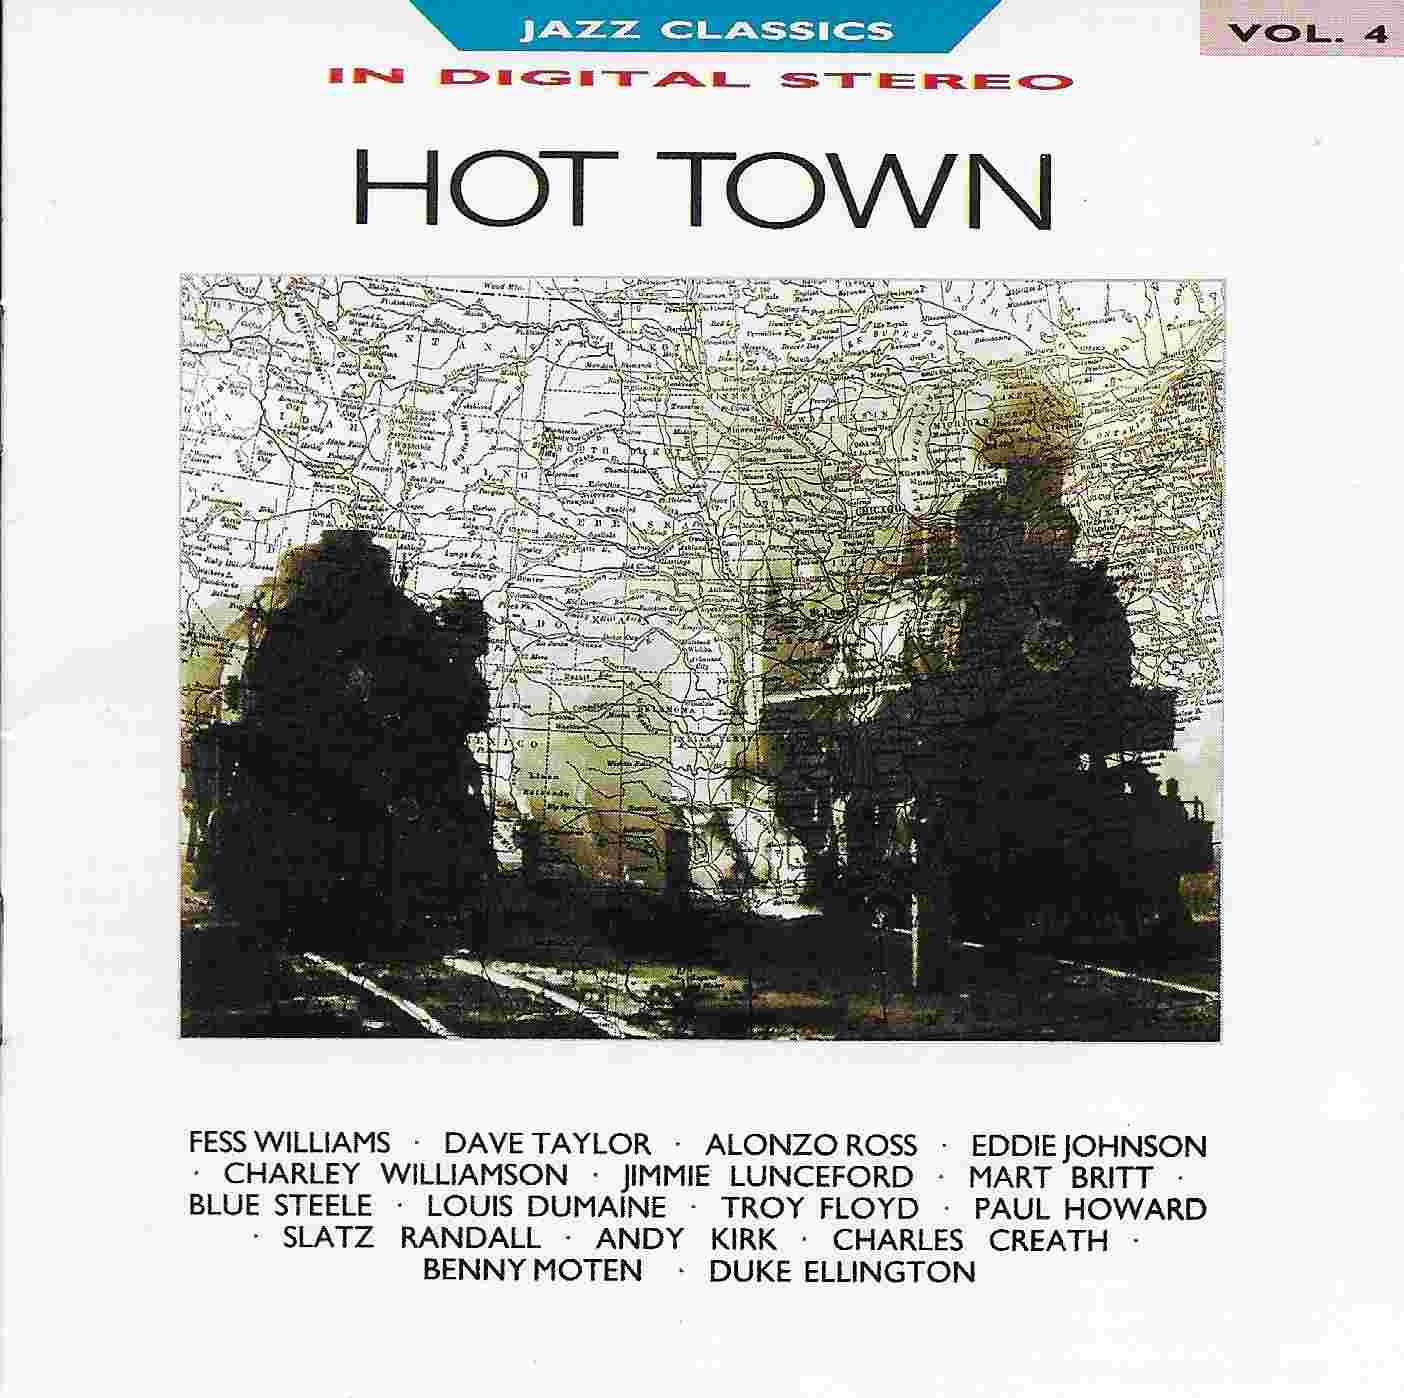 Picture of Jazz classics - Volume 4, Hot Town by artist Various from the BBC cds - Records and Tapes library